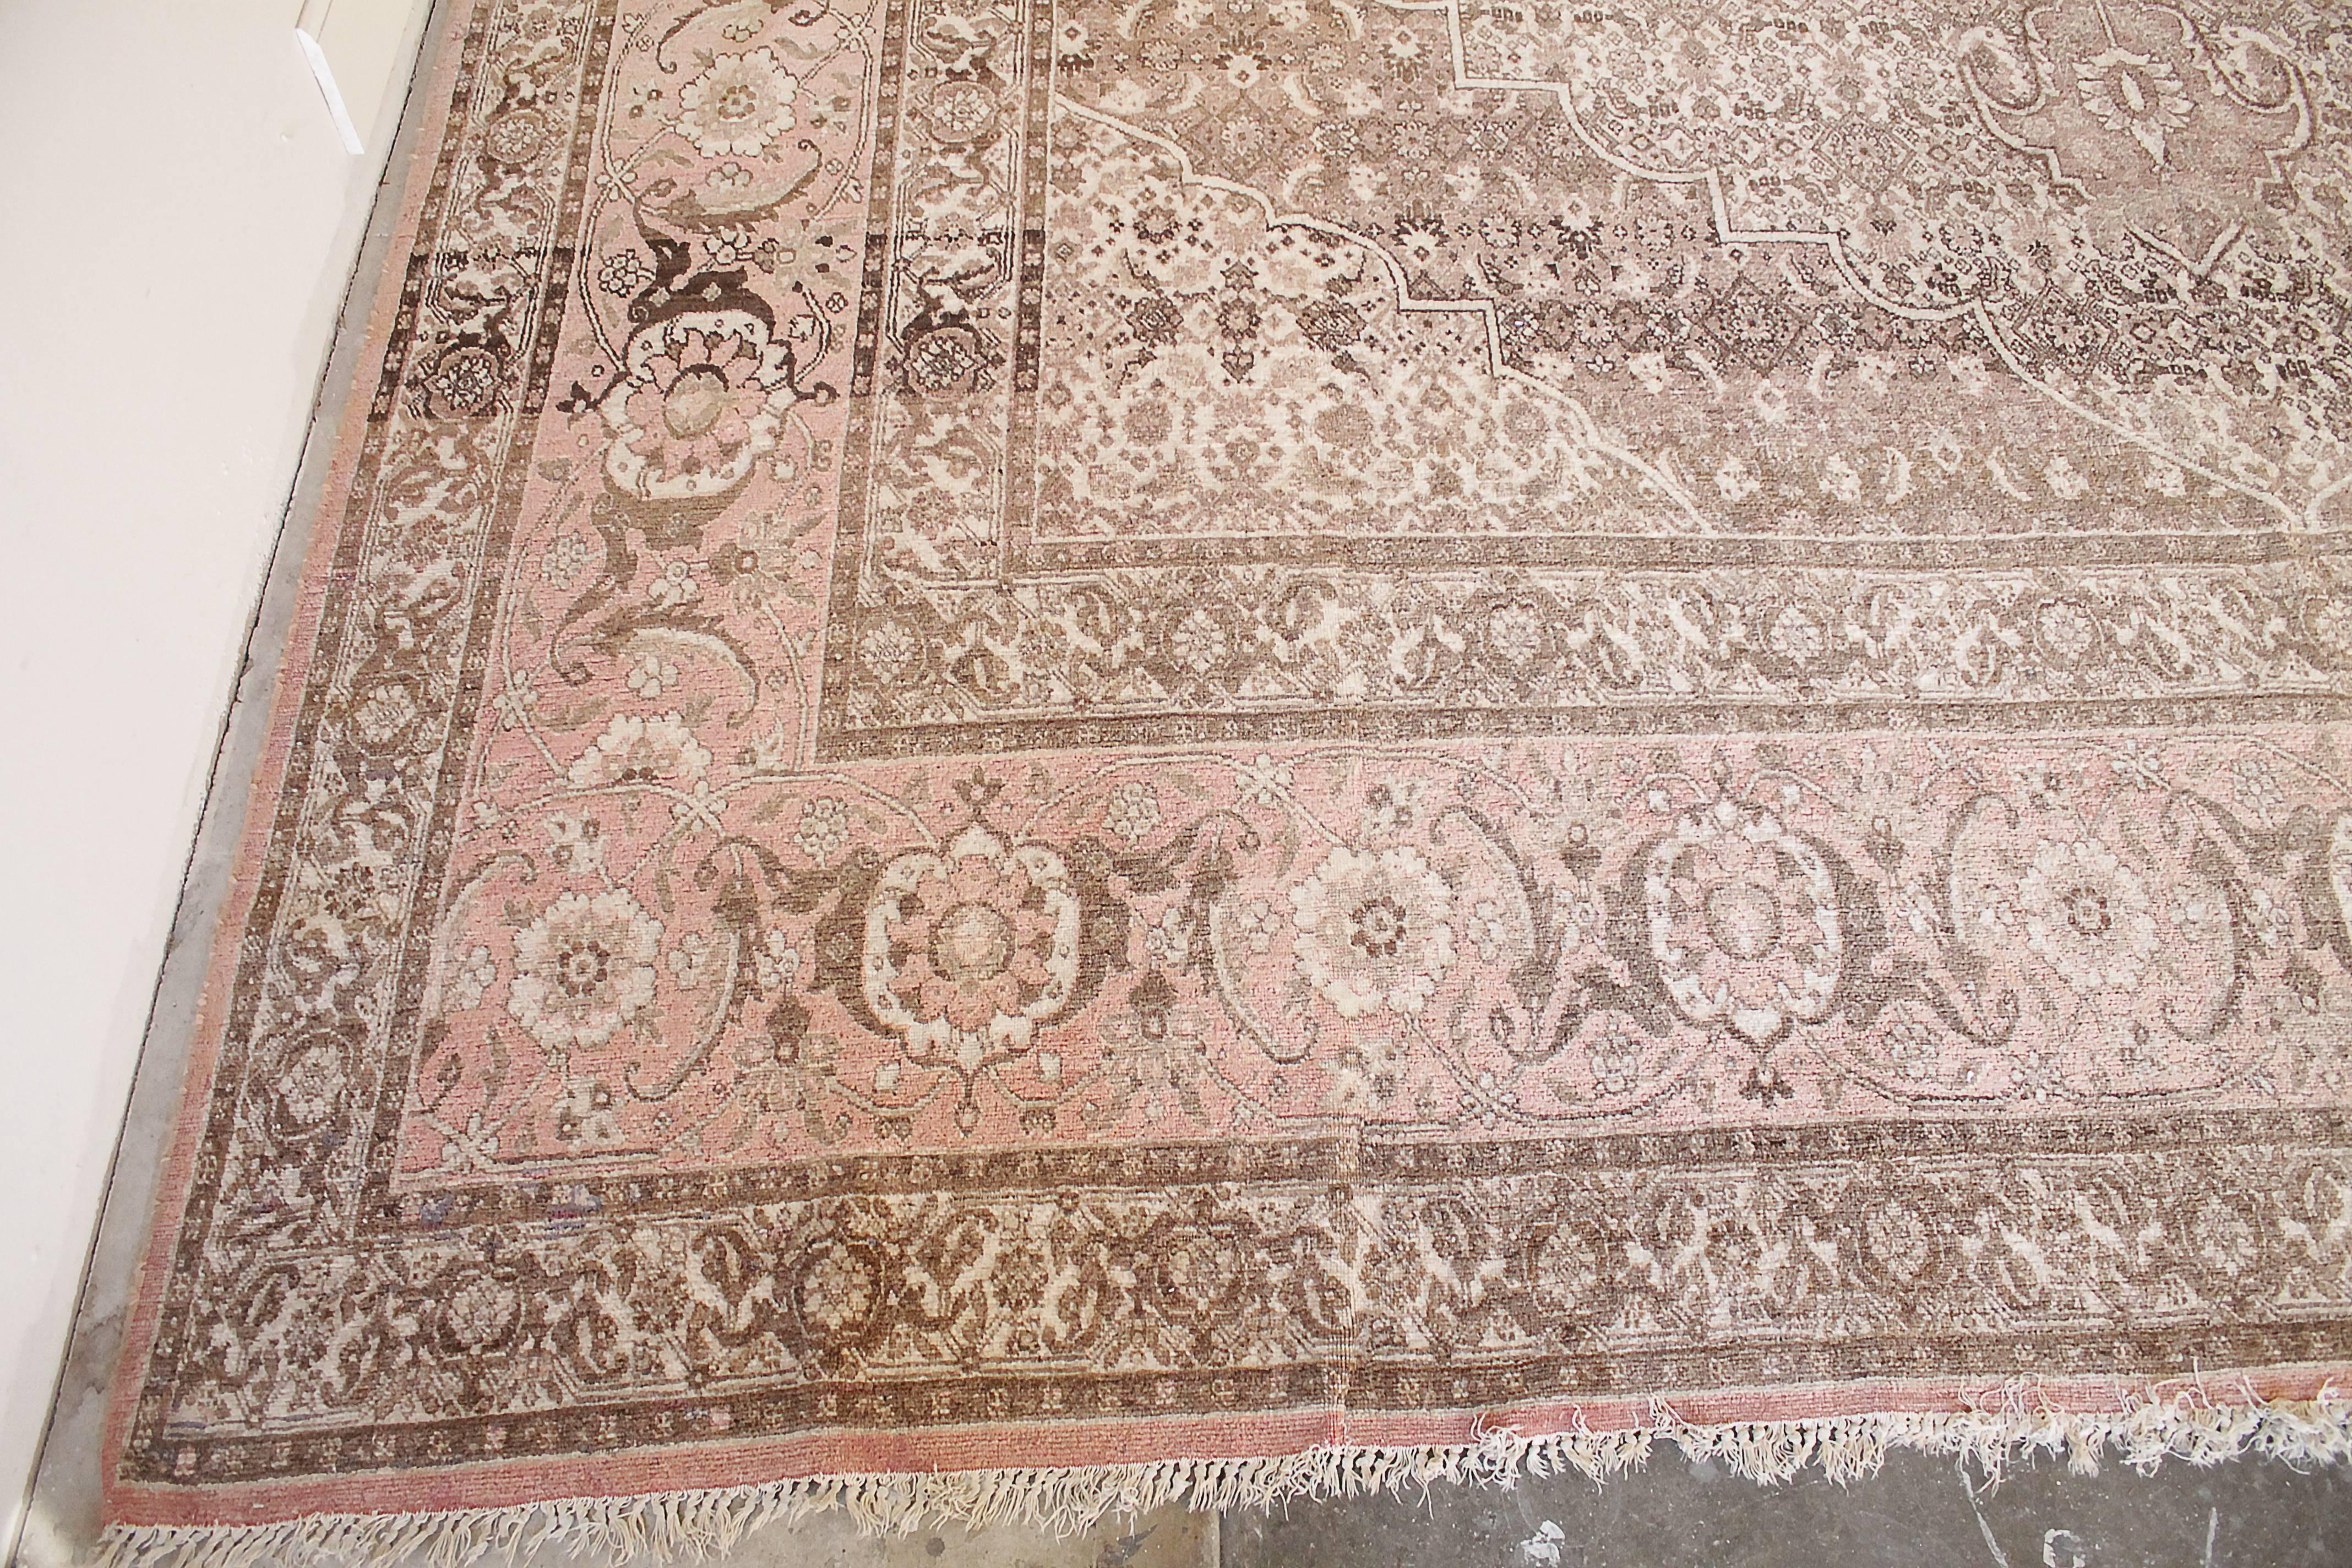 Lovely vintage rug, colors are faded pinks, creams, browns, with tassel ends. Tassels are worn and some longer than others. Subtle markings shown in the photos, area of the rug where there are minor discolorations. Its a beautiful rug, in good